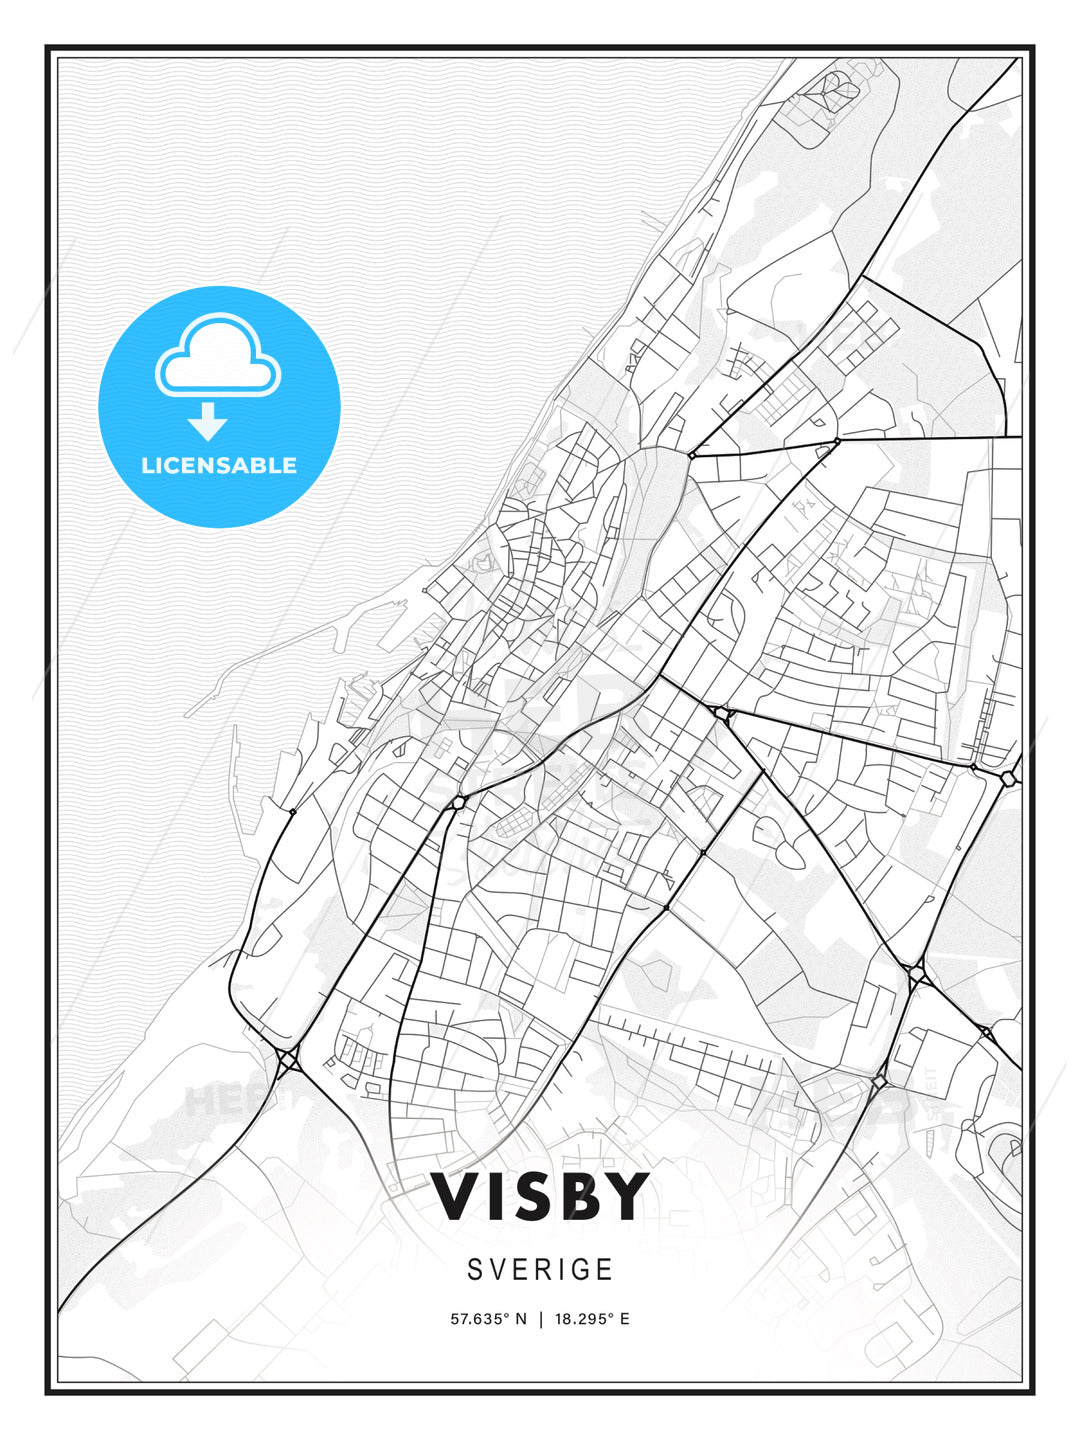 Visby, Sweden, Modern Print Template in Various Formats - HEBSTREITS Sketches